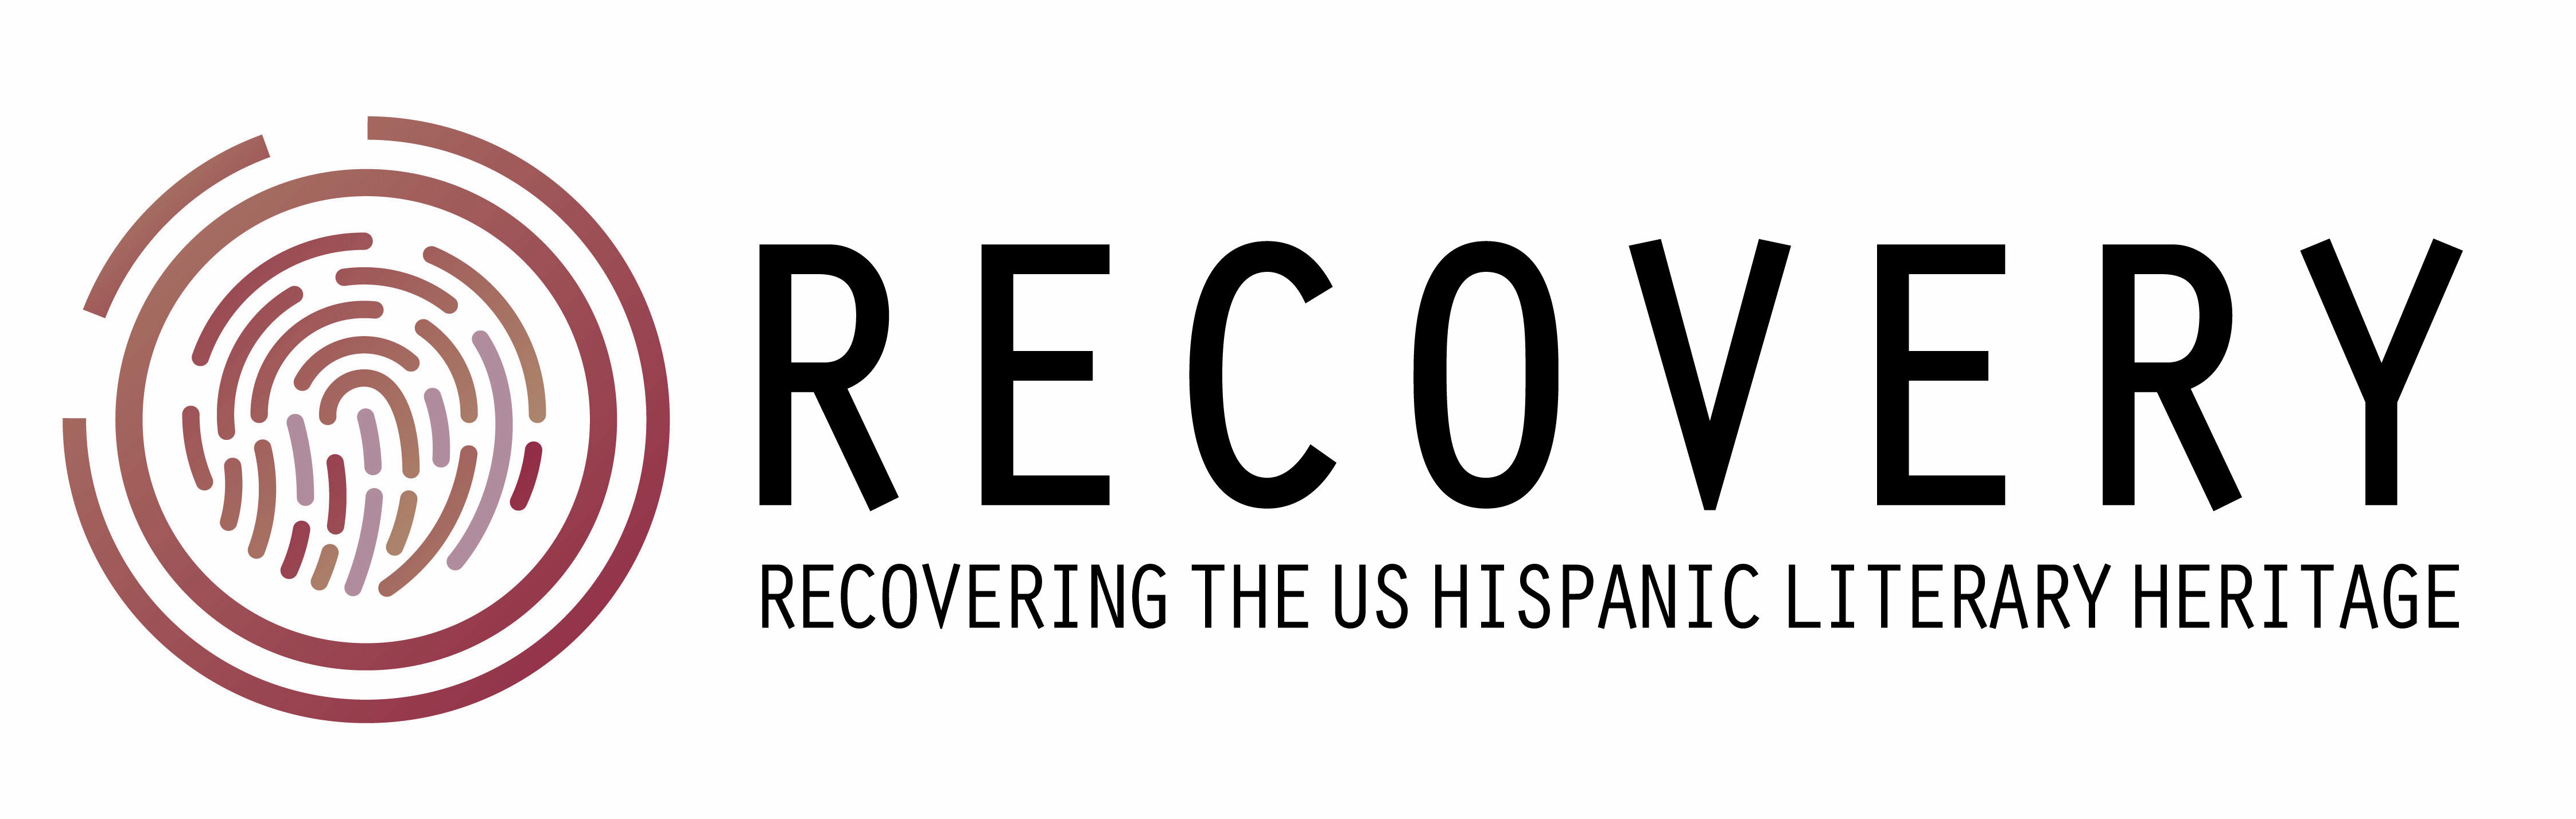 Recovery: Recovering the US Hispanic Literary Heritage